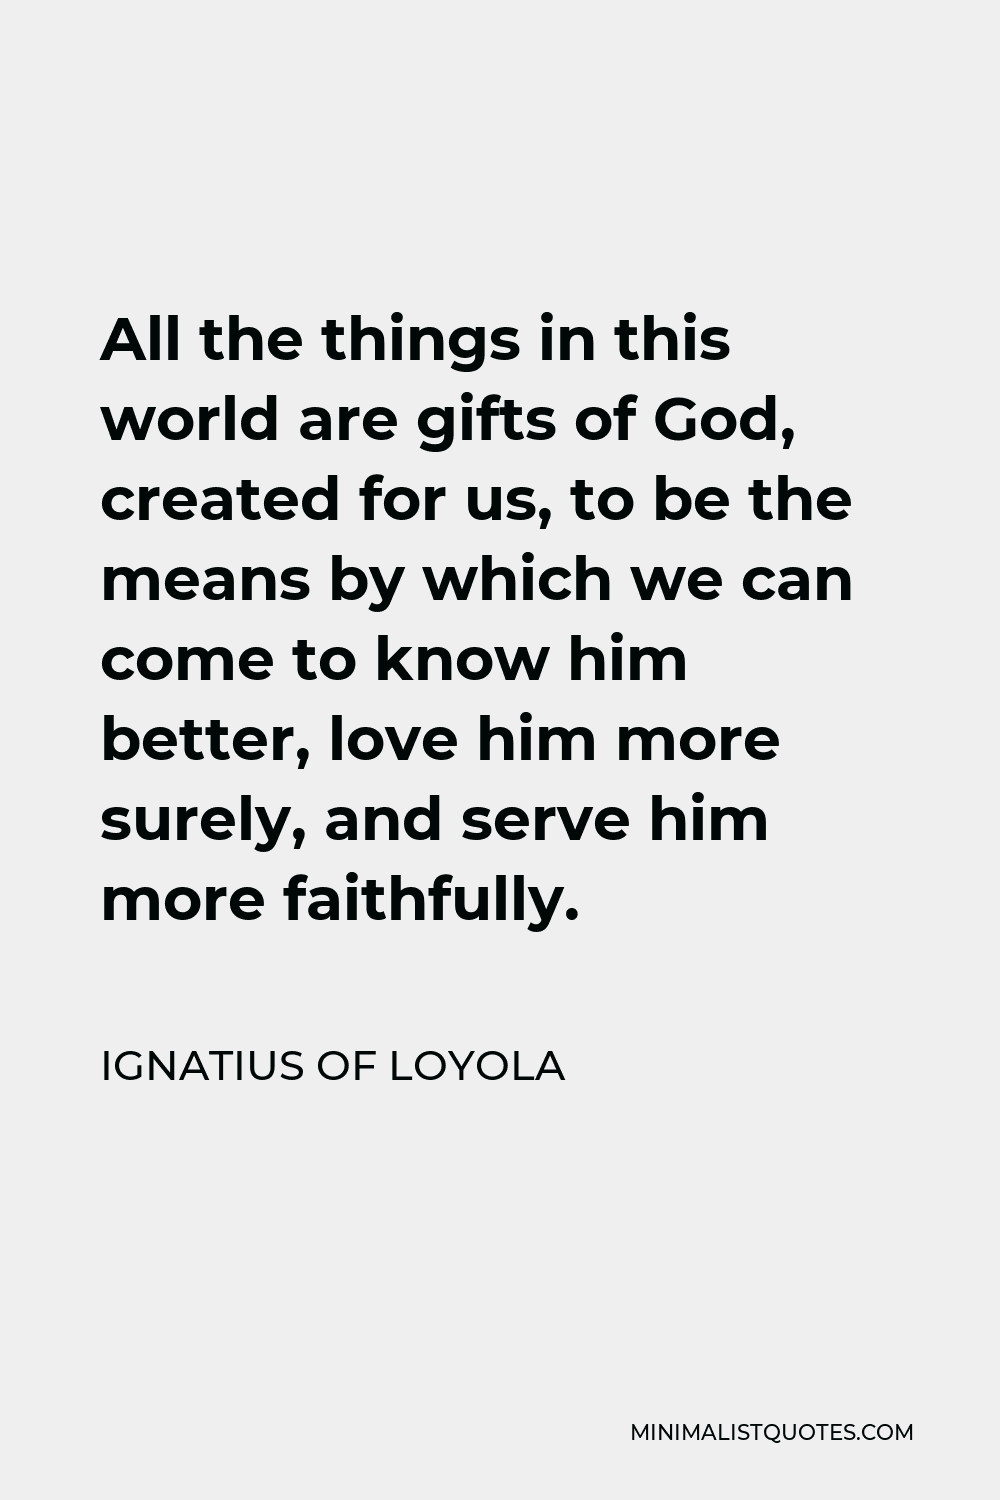 Ignatius of Loyola Quote - All the things in this world are gifts of God, created for us, to be the means by which we can come to know him better, love him more surely, and serve him more faithfully.